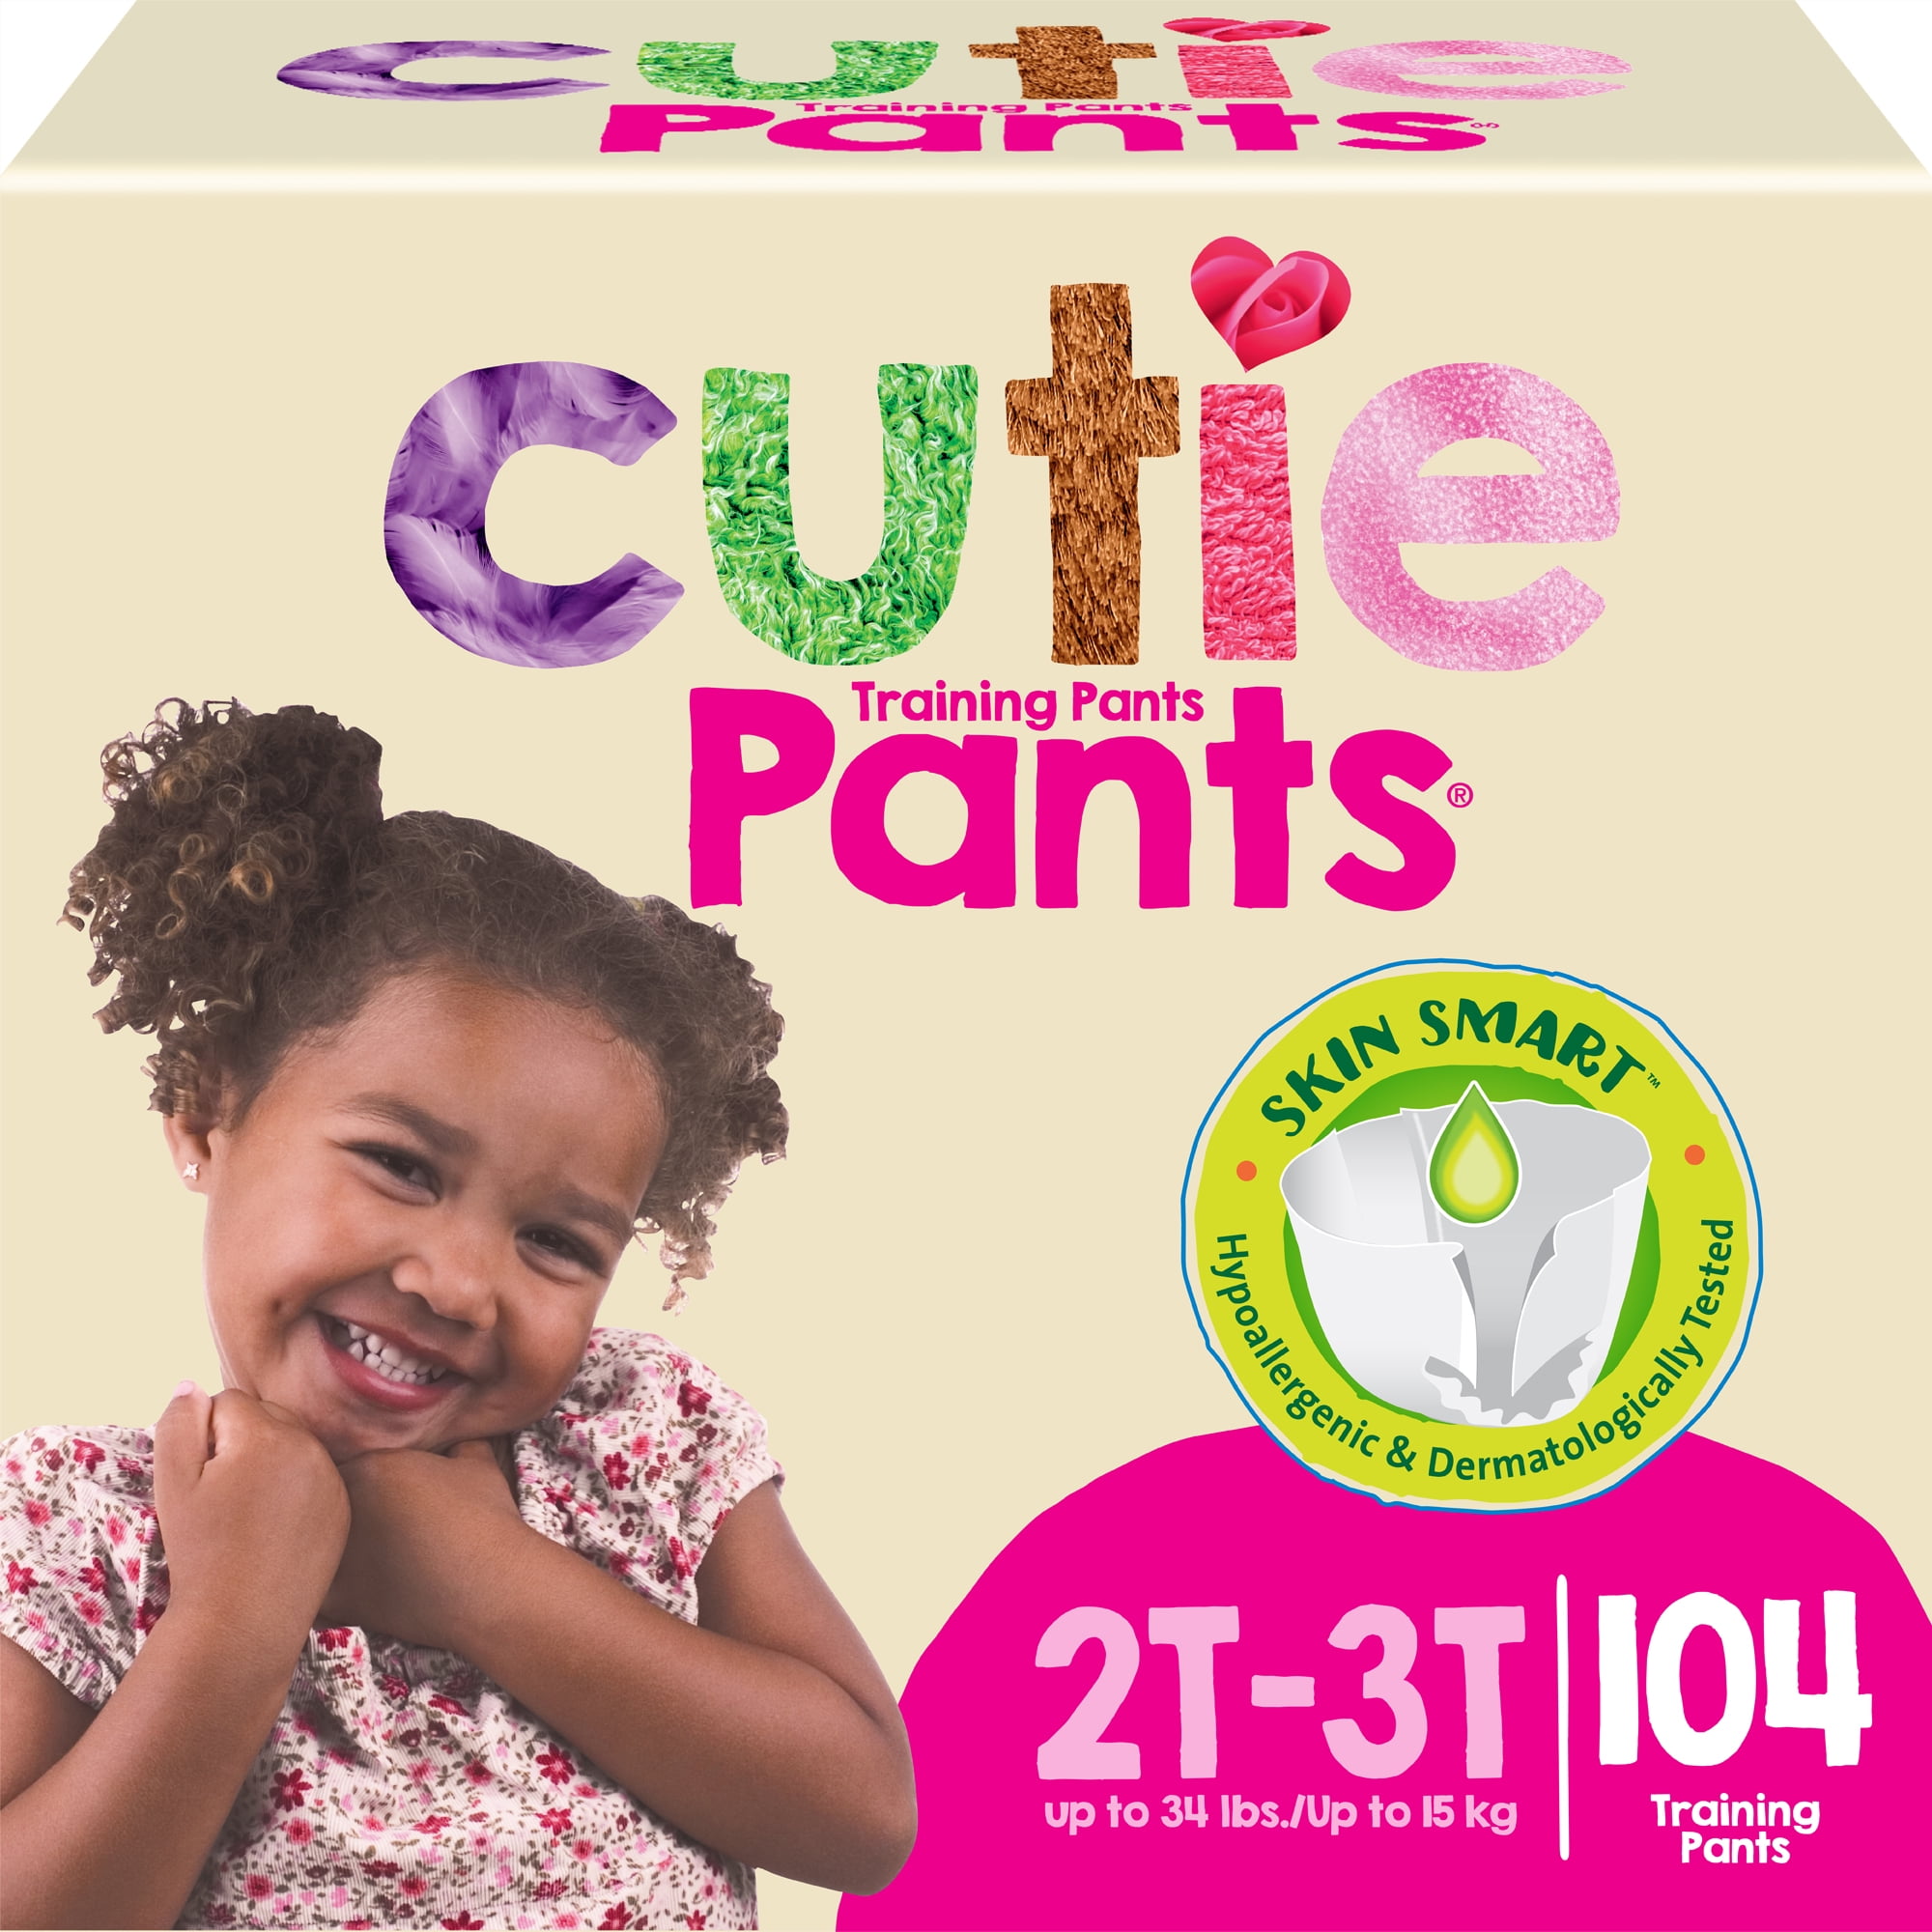 Cutie Girls 4T/5T Refastenable Potty Training Pants, Hypoallergenic with  Skin Smart, 76 Count